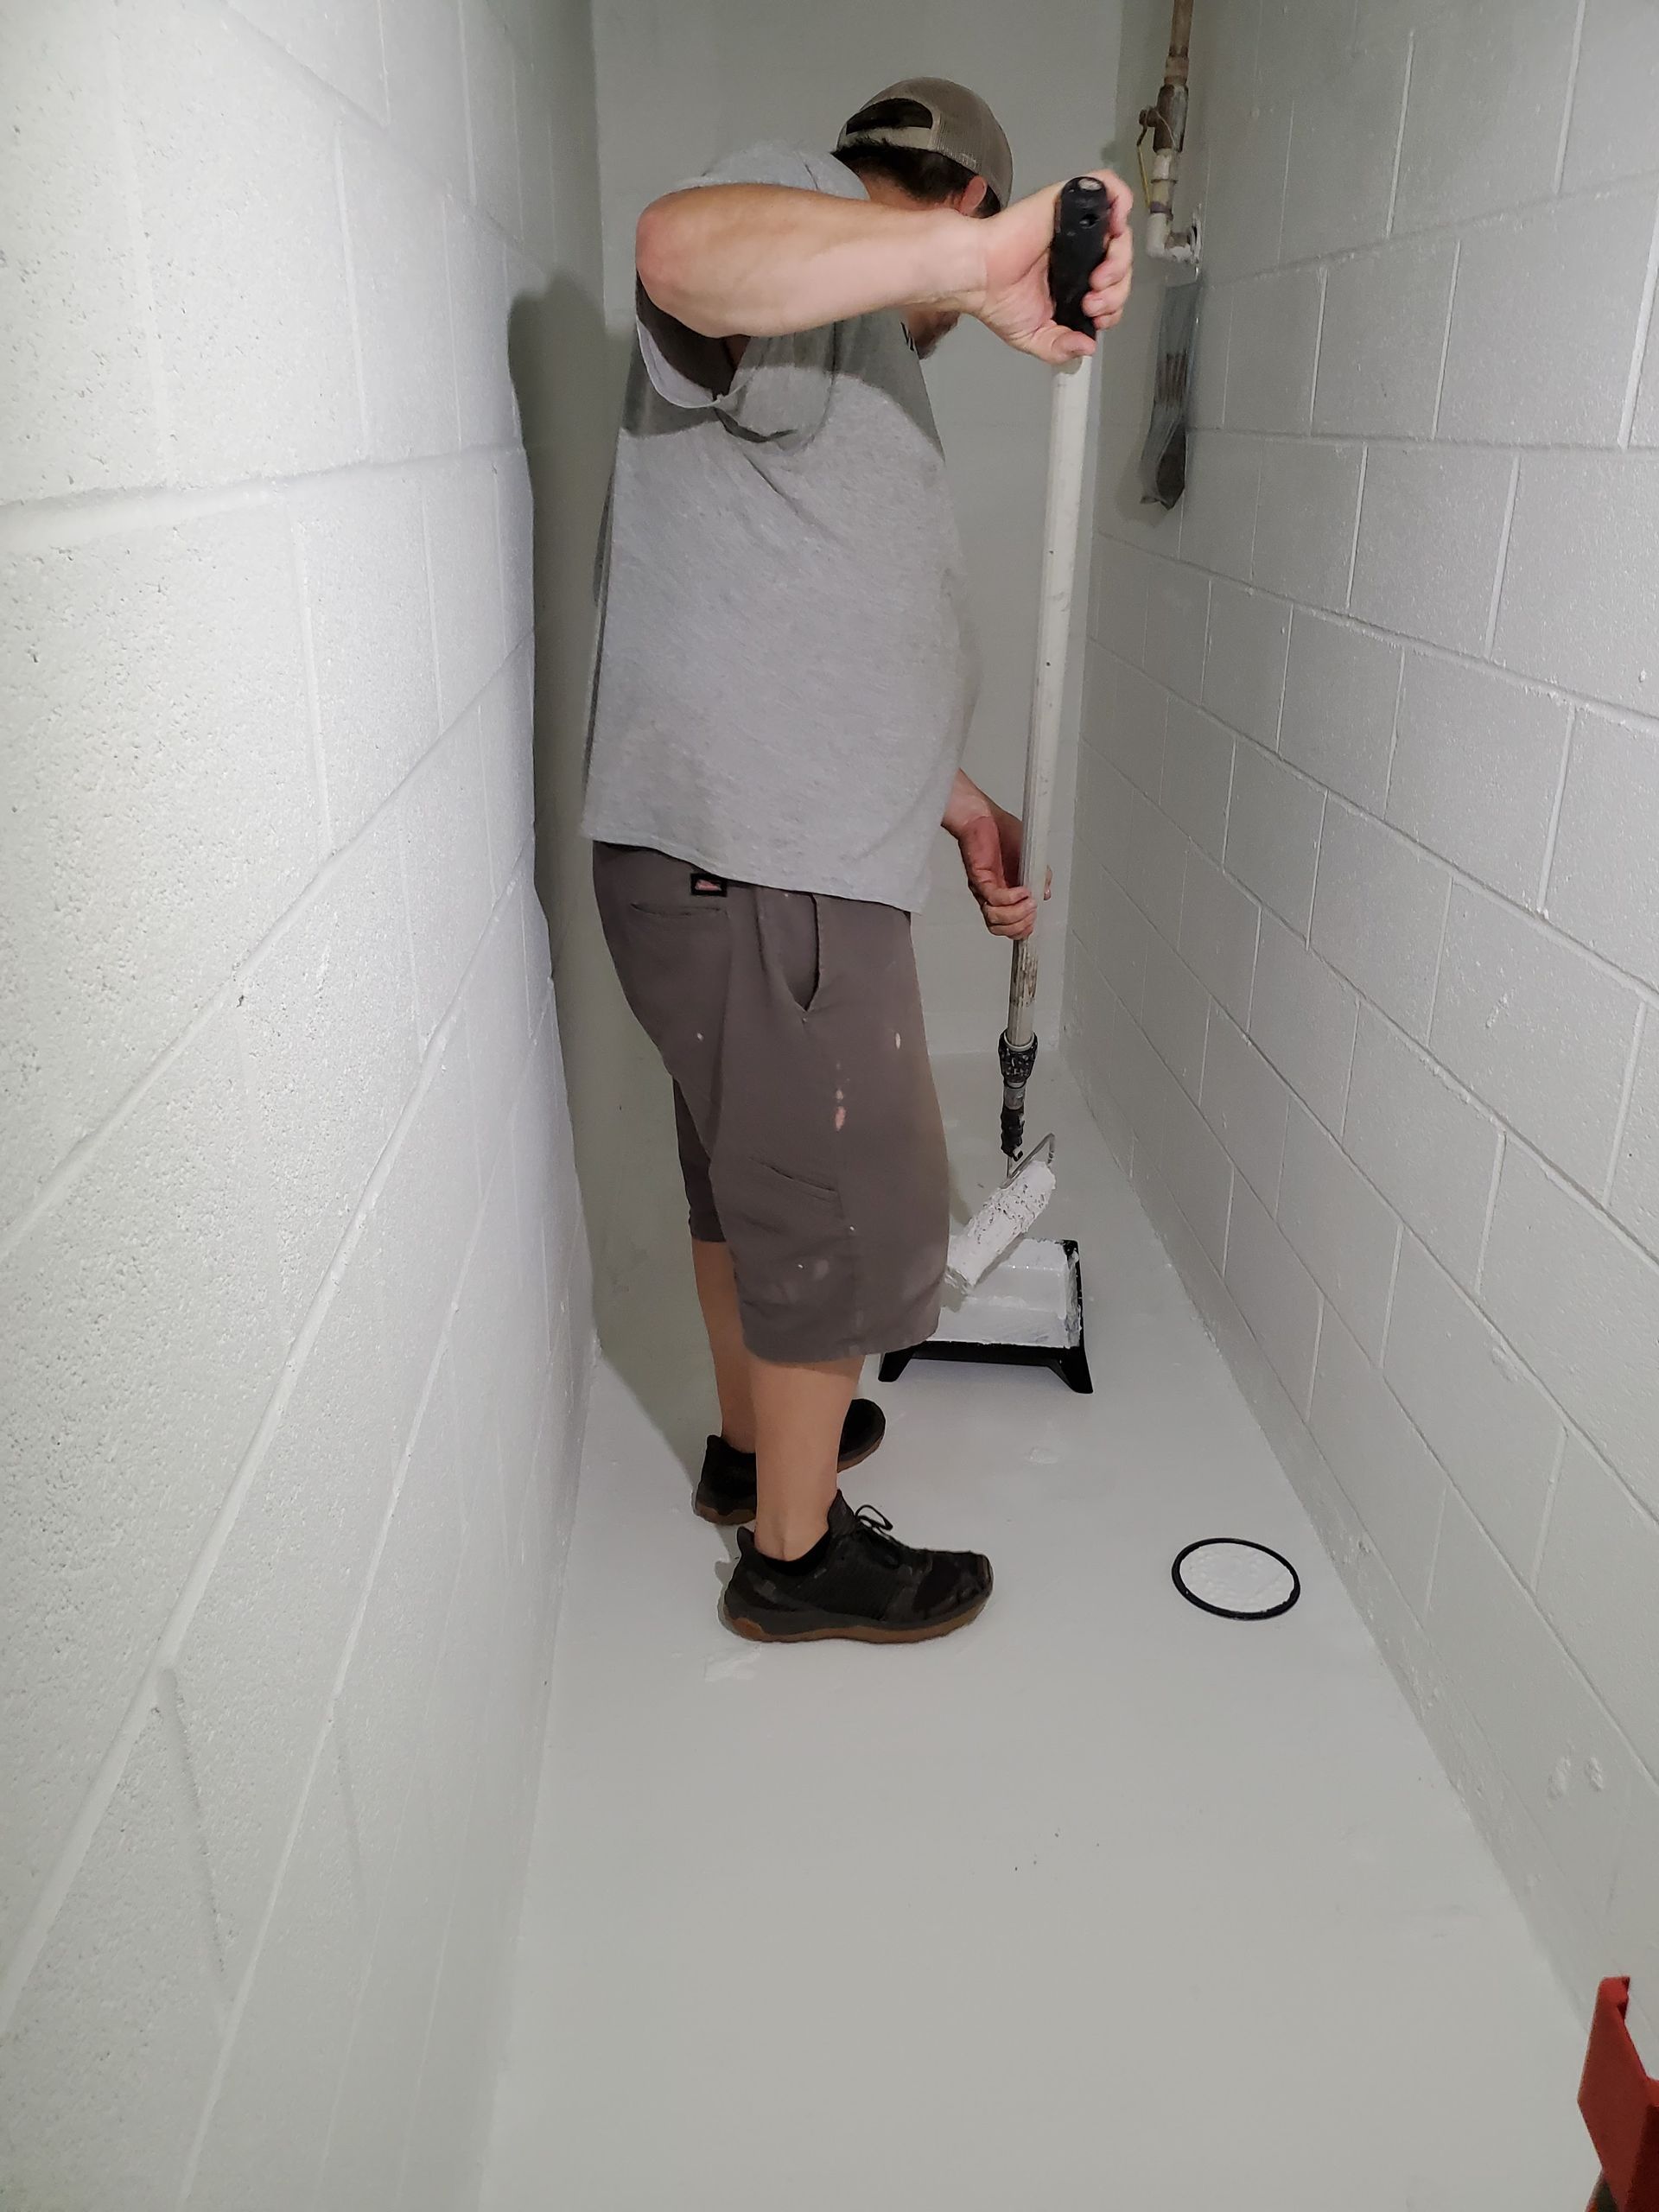 a man is standing in a hallway holding a cane